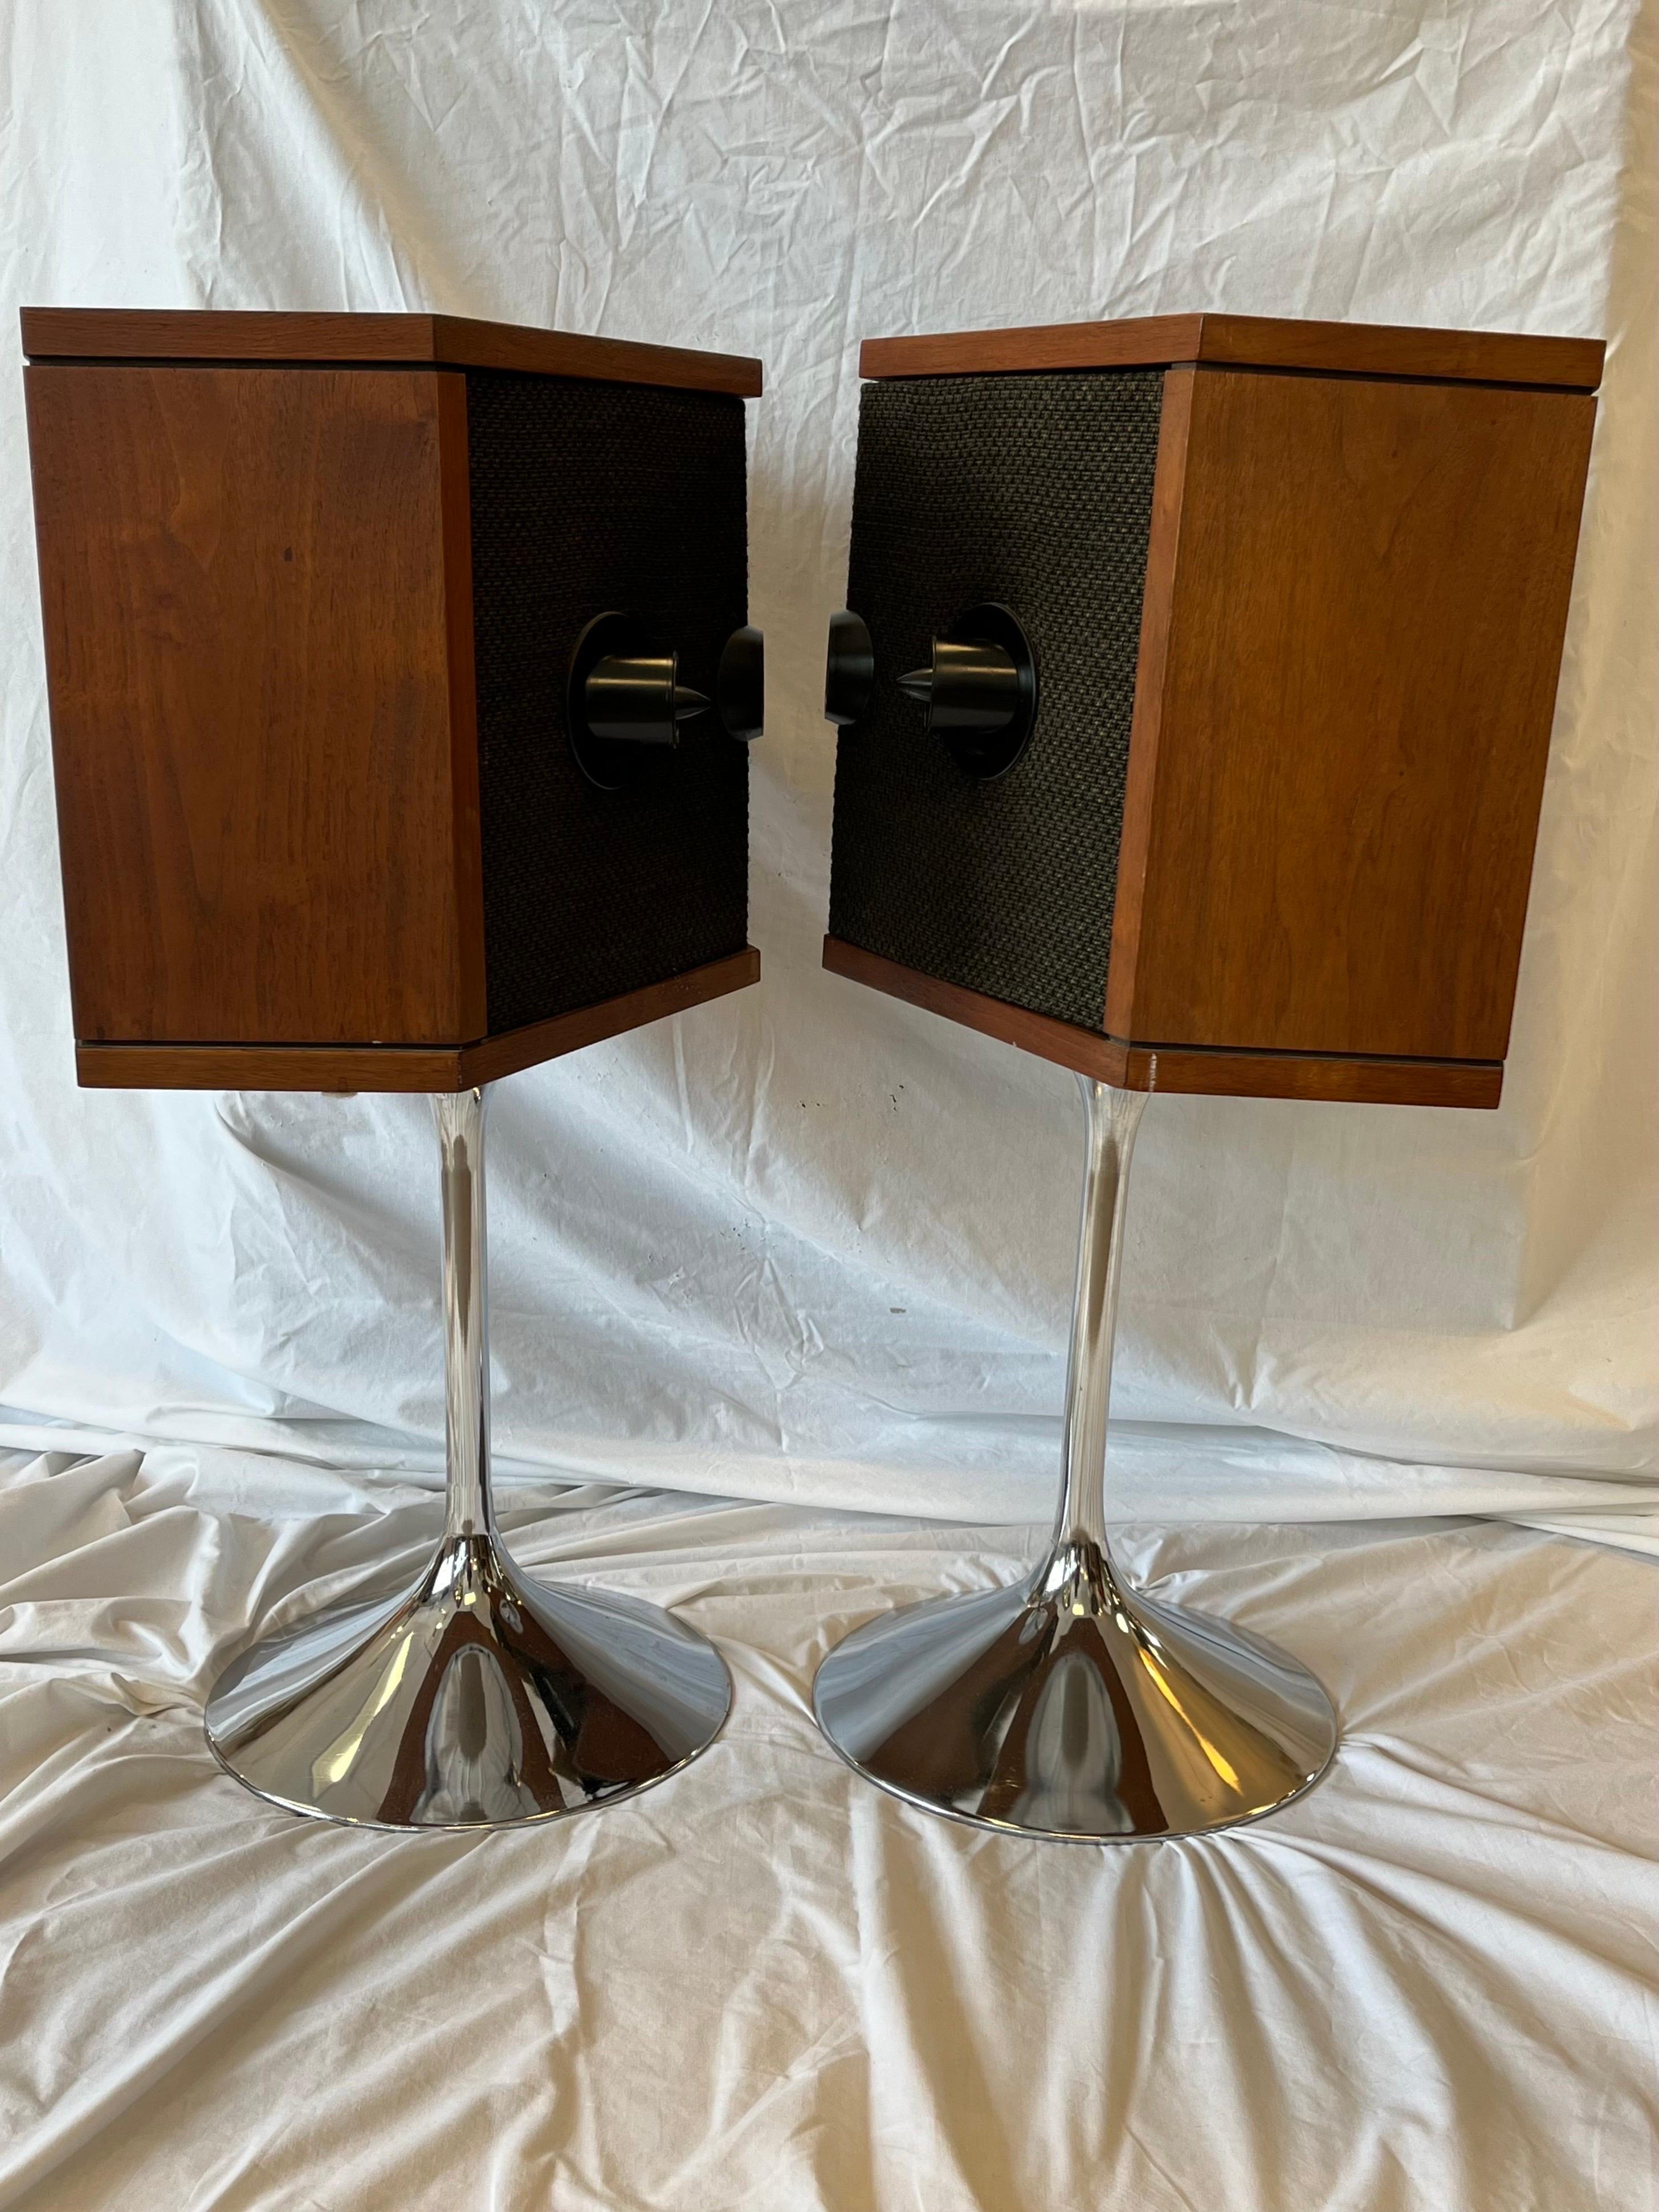 A vintage, late 20th century pair of the now discontinued and always highly coveted Bose 901 speakers. This pair of 901 direct / reflecting speakers by Bose is presented on the incredibly desirable Eero Saarinen chrome tulip bases. While I have not